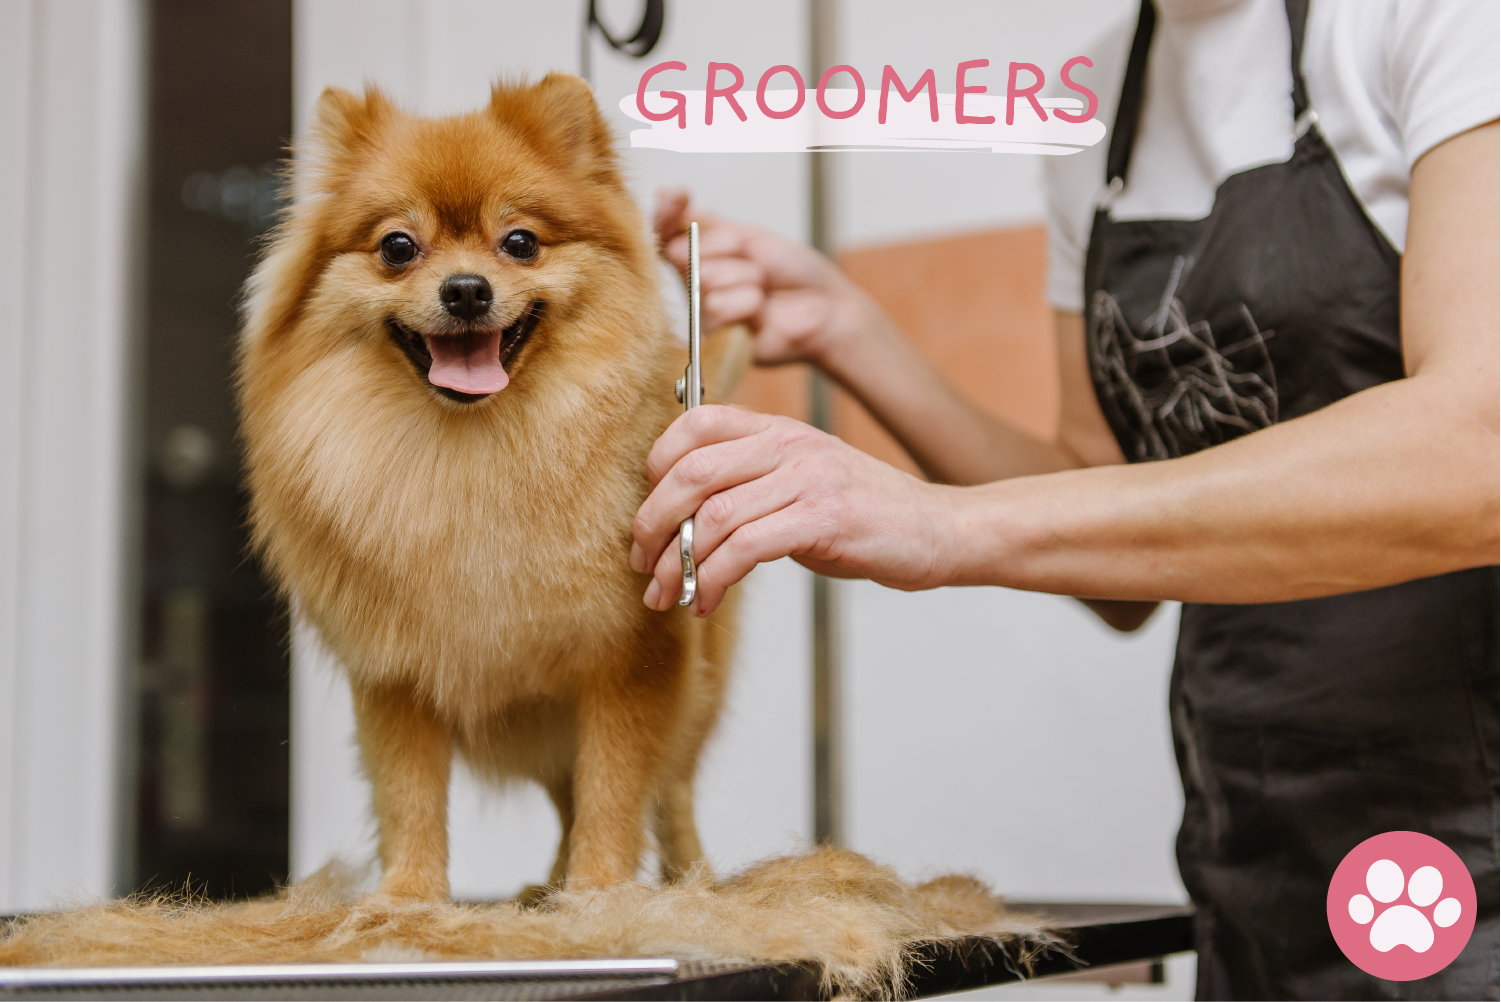 This is another benefit of pet grooming services.